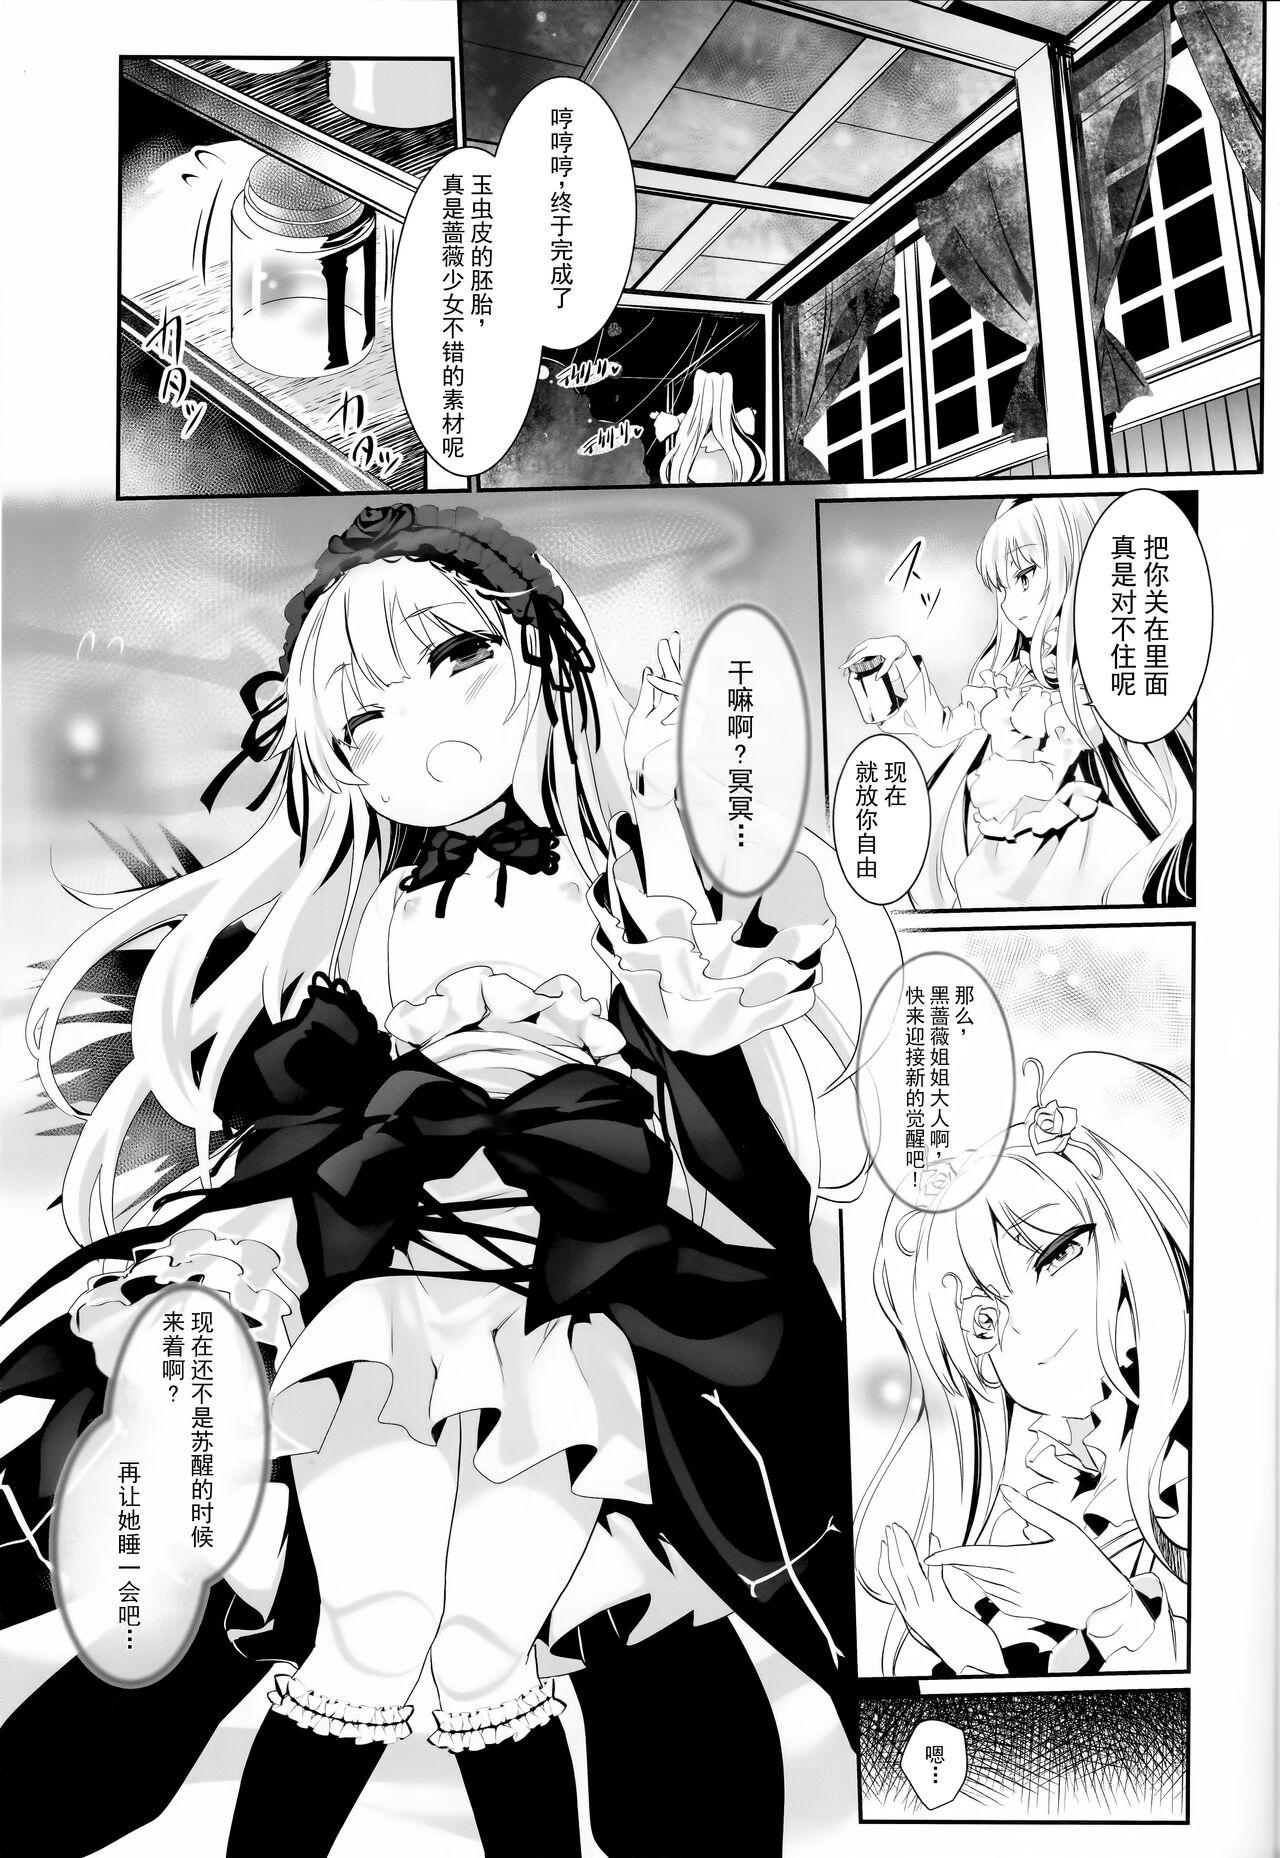 Suckingcock Glamour Growth - Rozen maiden Rabo - Page 2